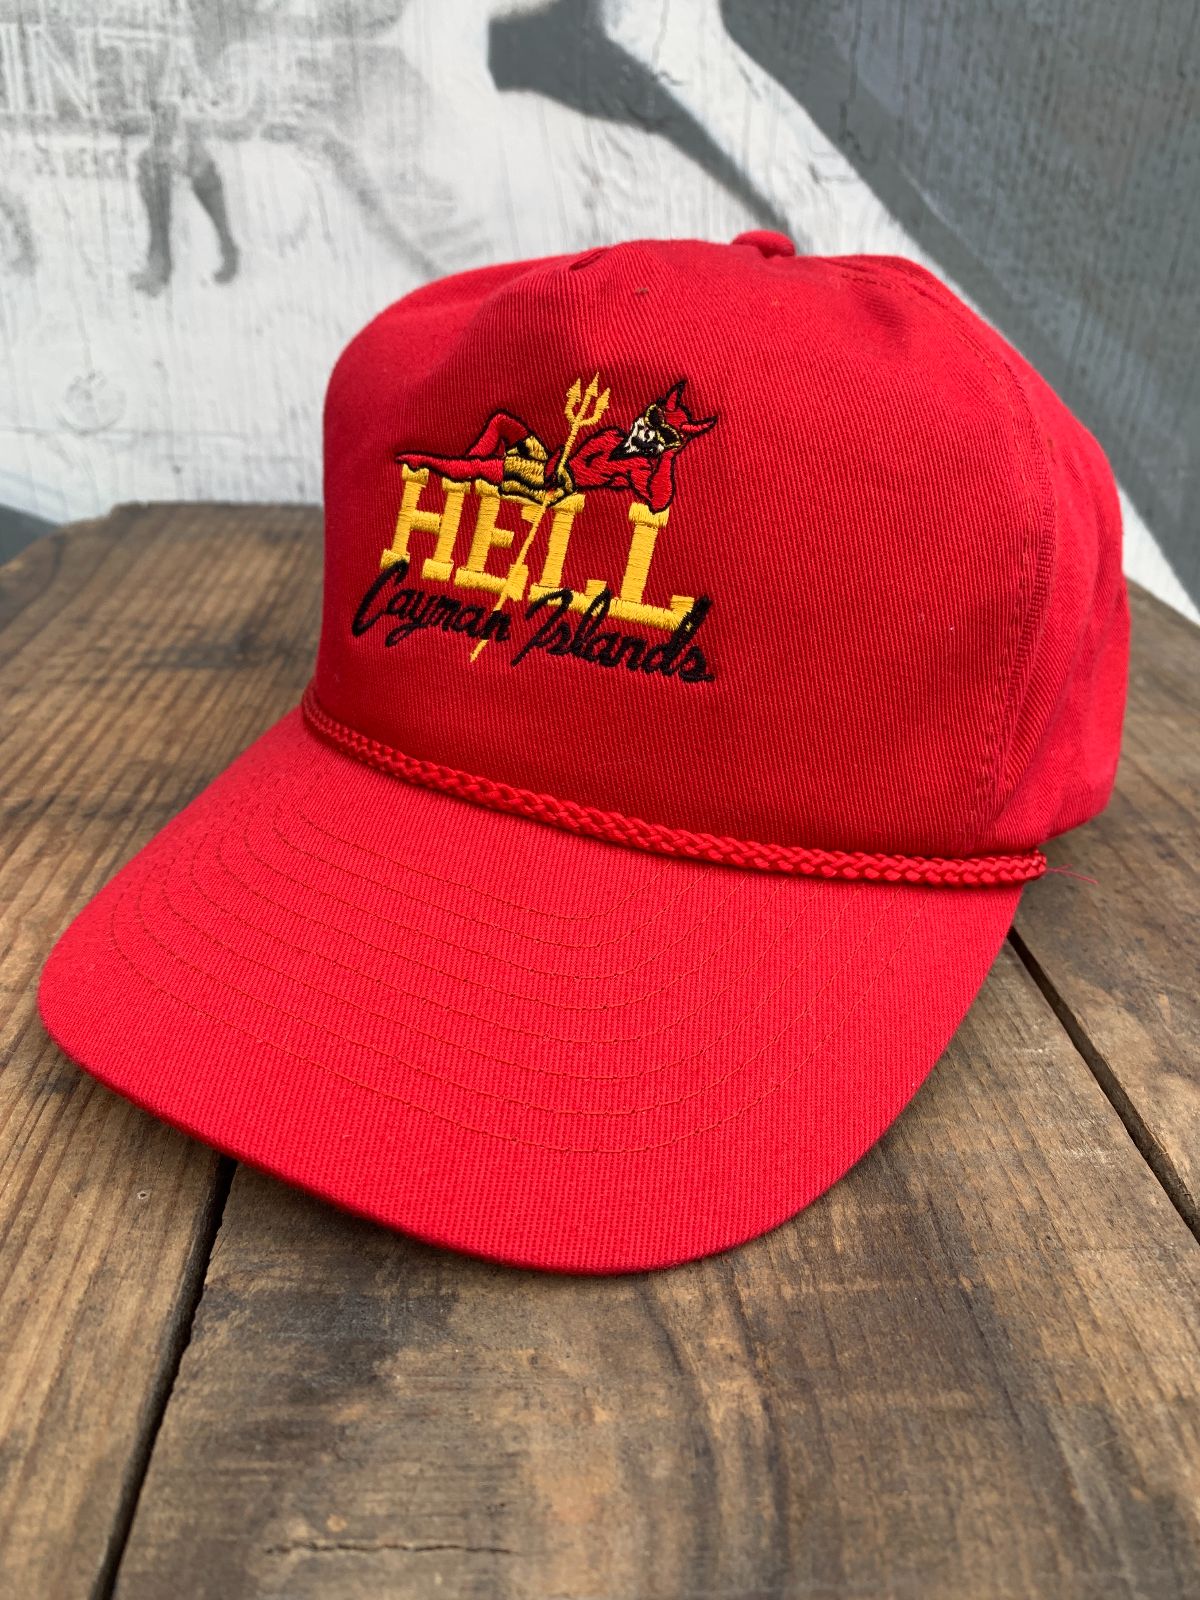 HELL CAYMAN ISLANDS SEXY DEVIL EMBROIDERED SNAPBACK HAT